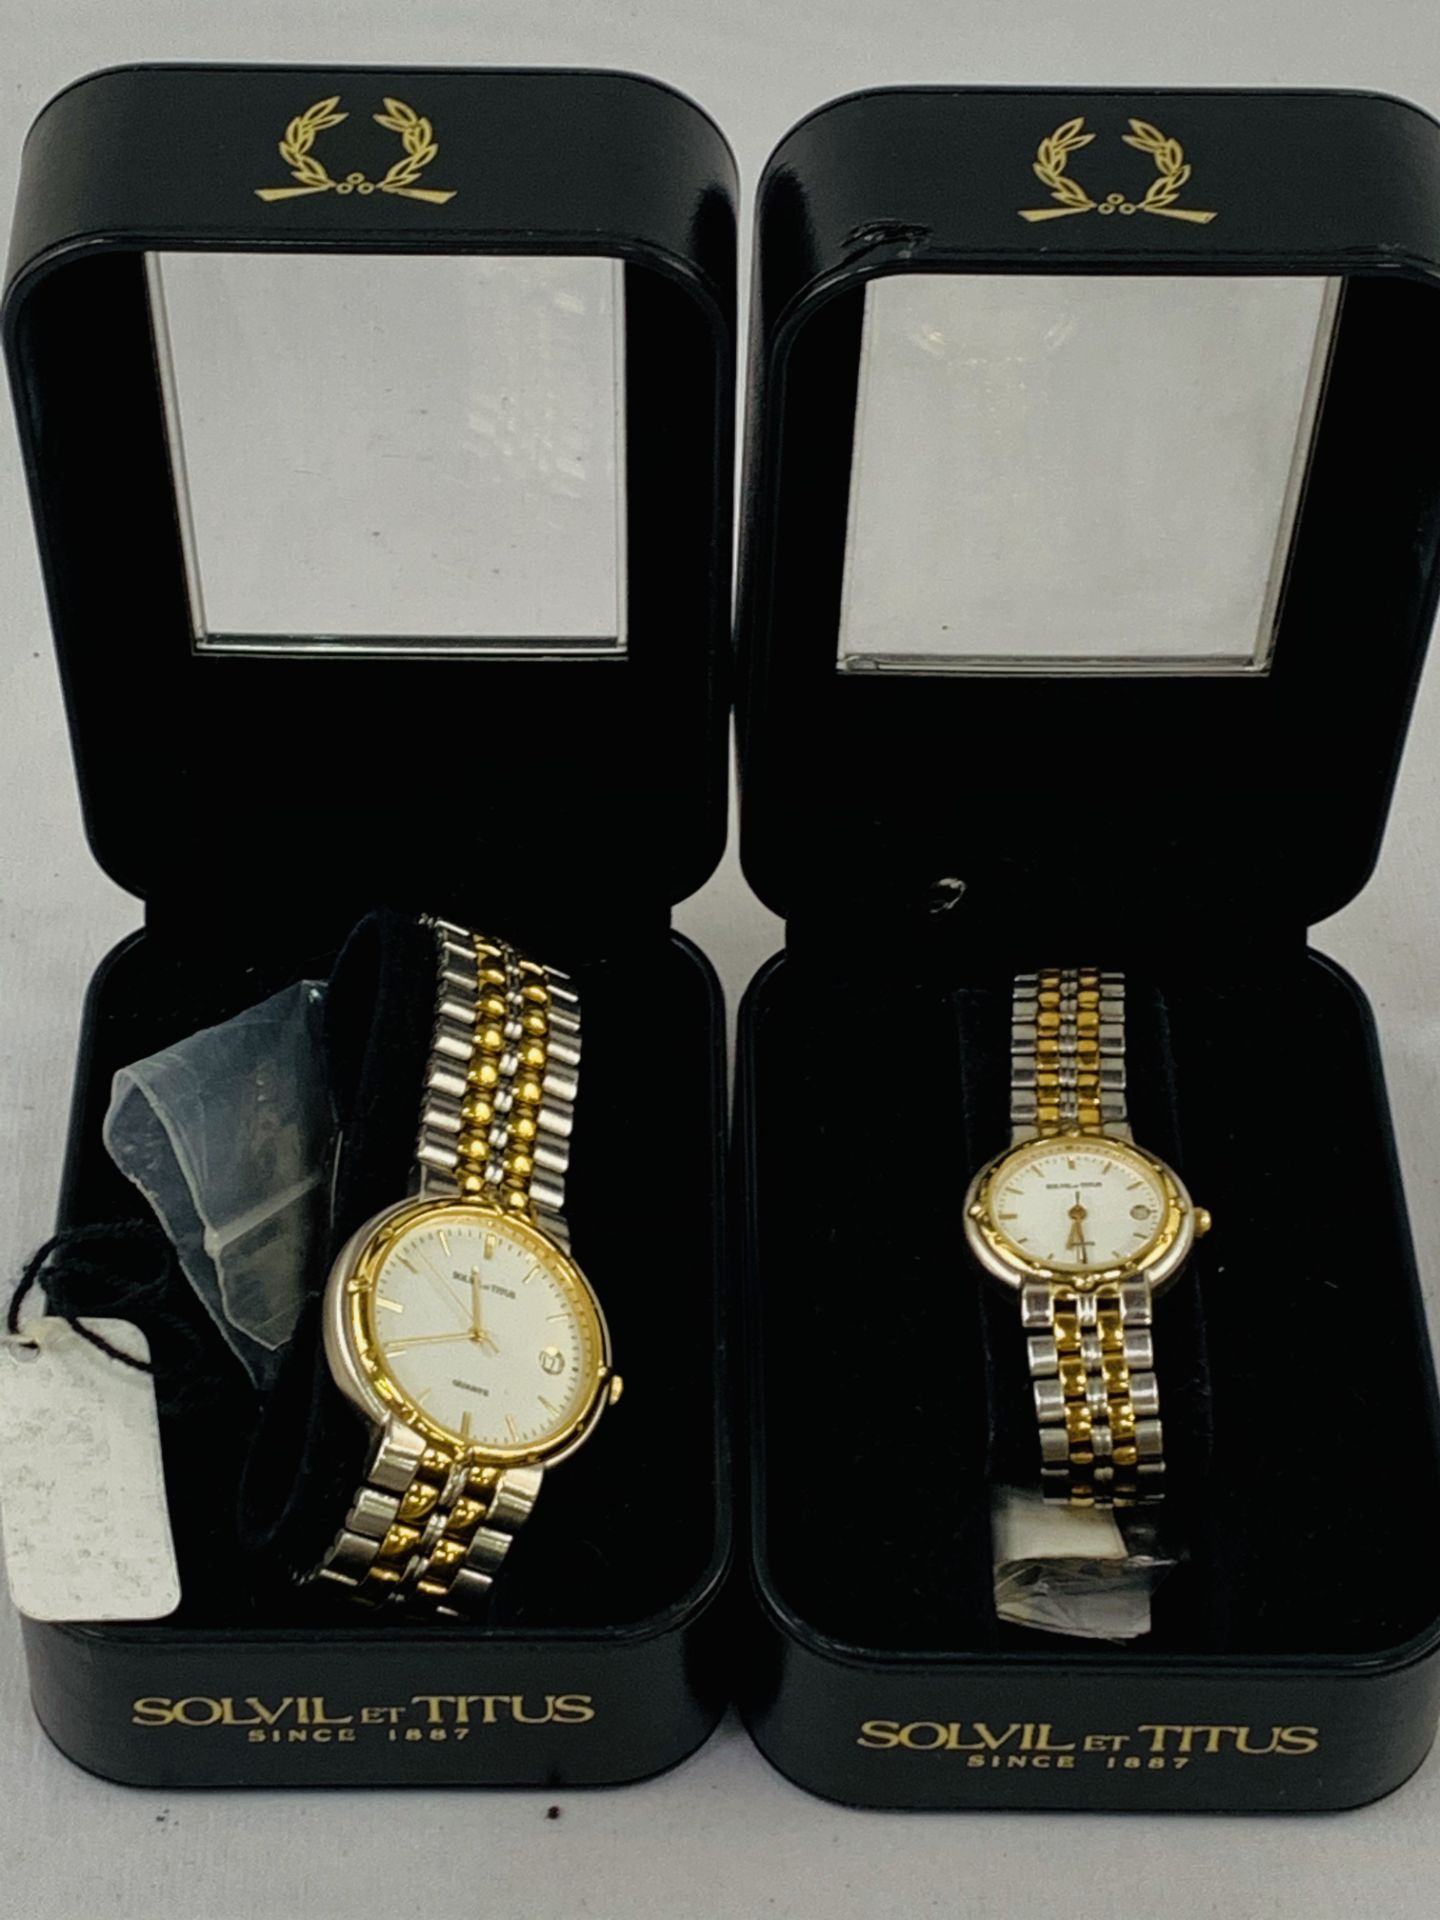 Two watches by Solvil et Titus, gentleman's and lady's.